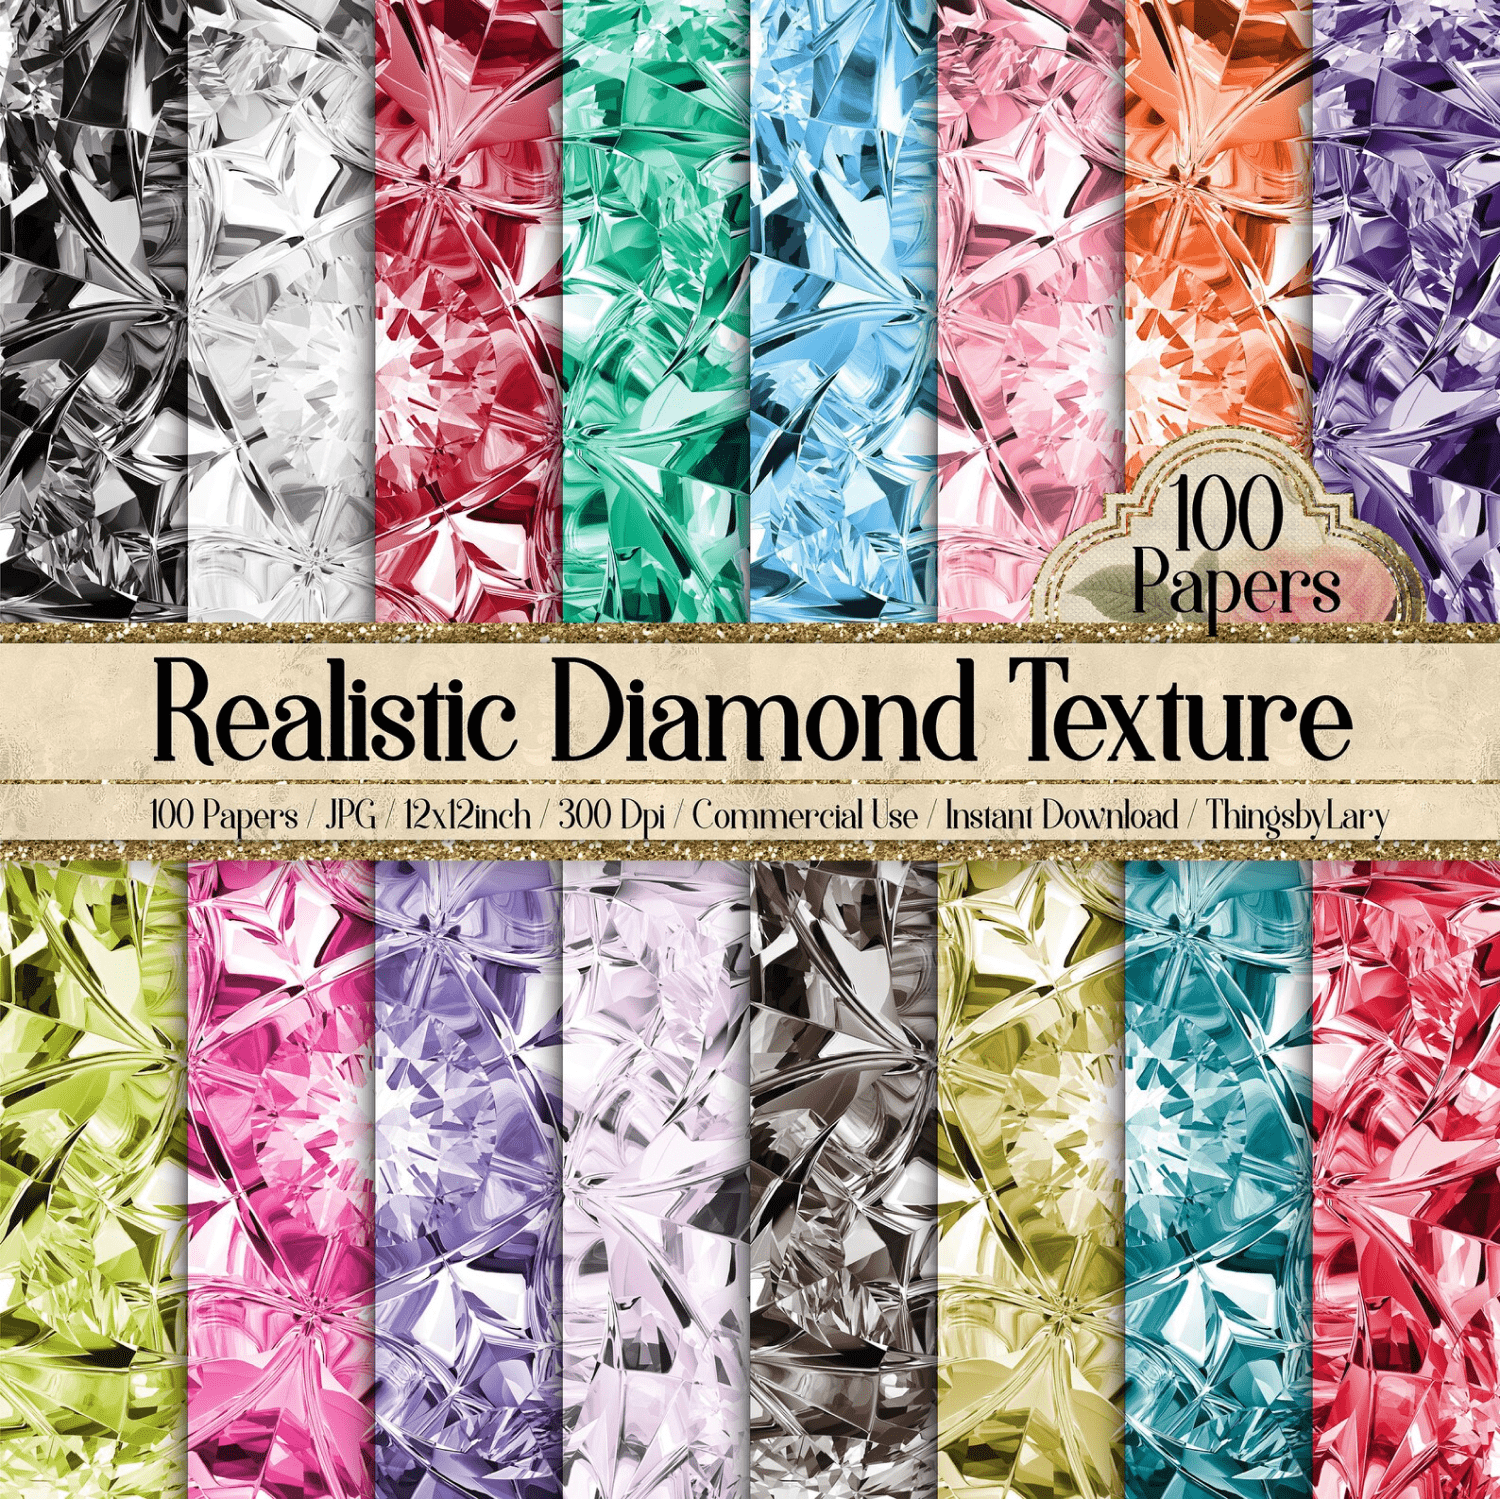 100 Real Diamond Texture Papers 12inch.